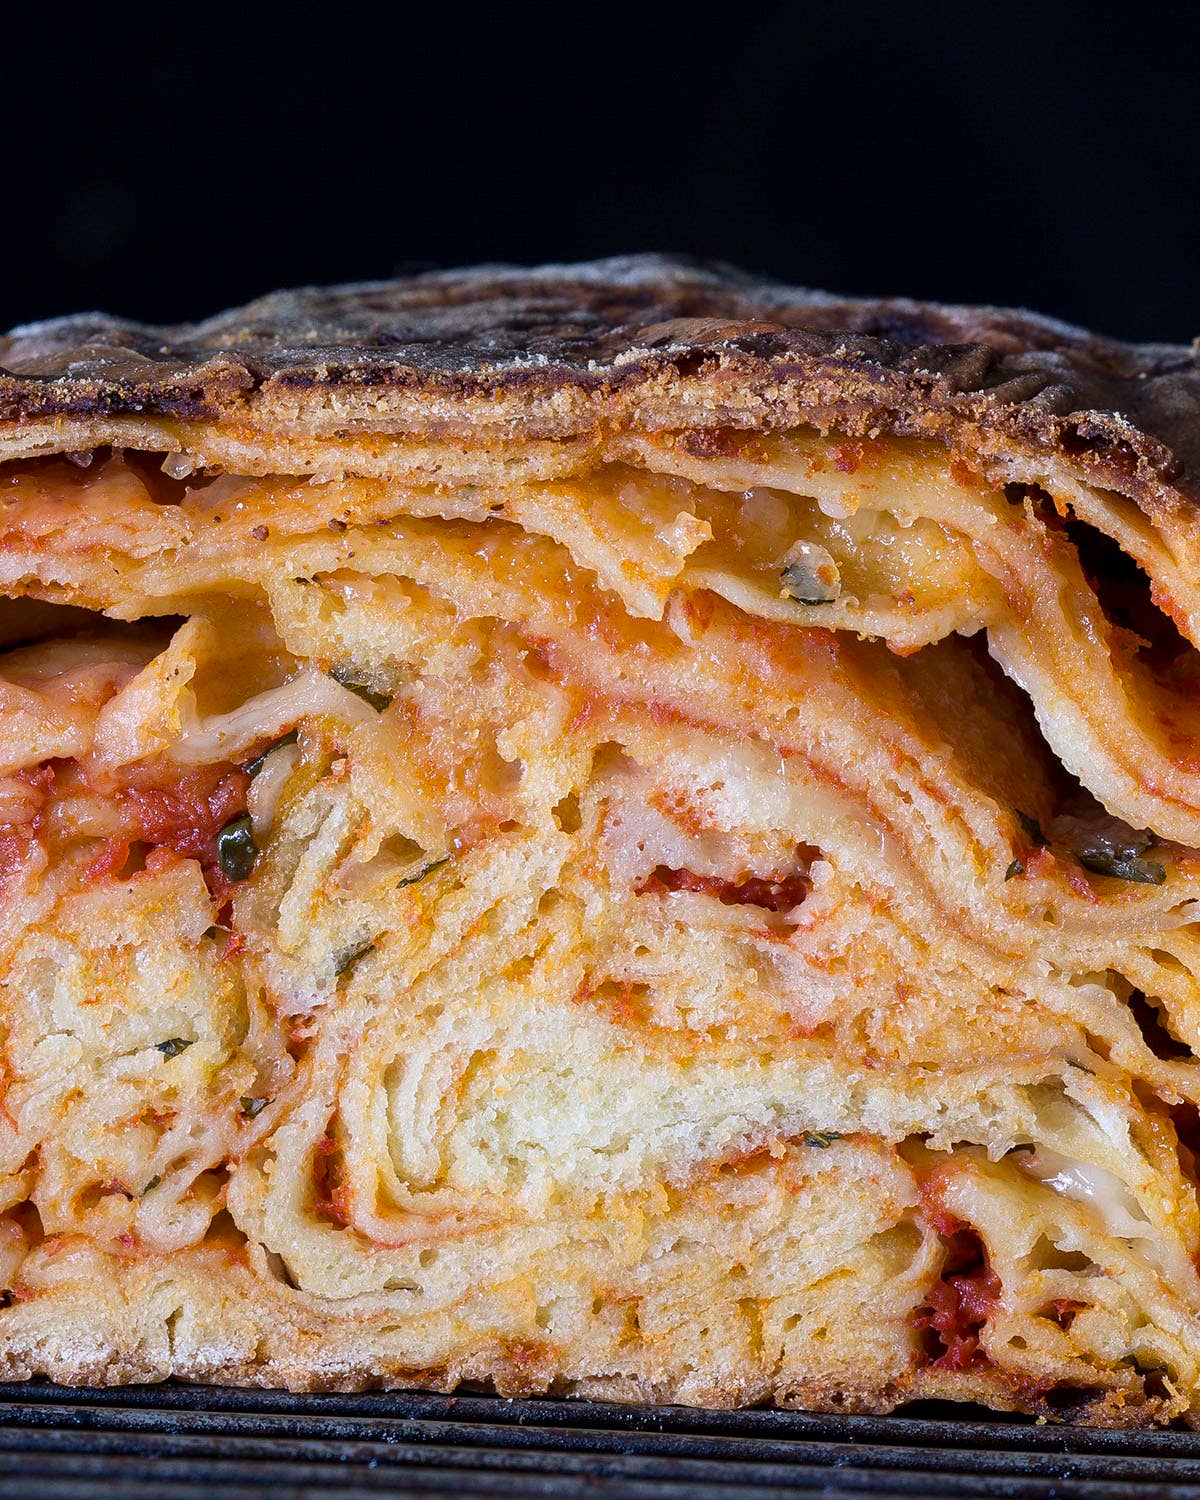 The Year in Weird, Delicious Bread